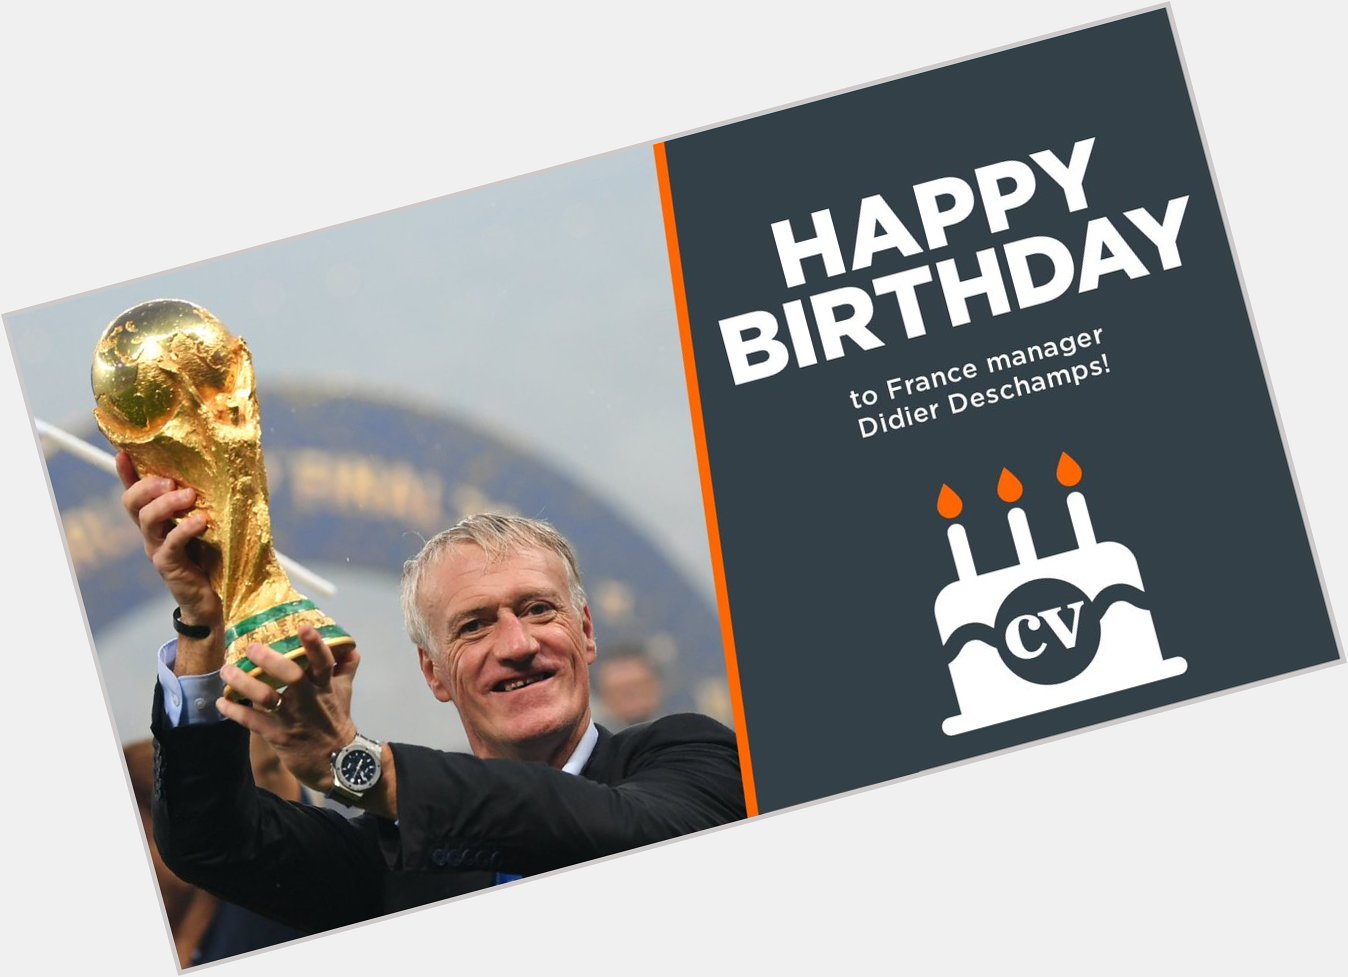  Happy birthday to France manager Didier Deschamps!  